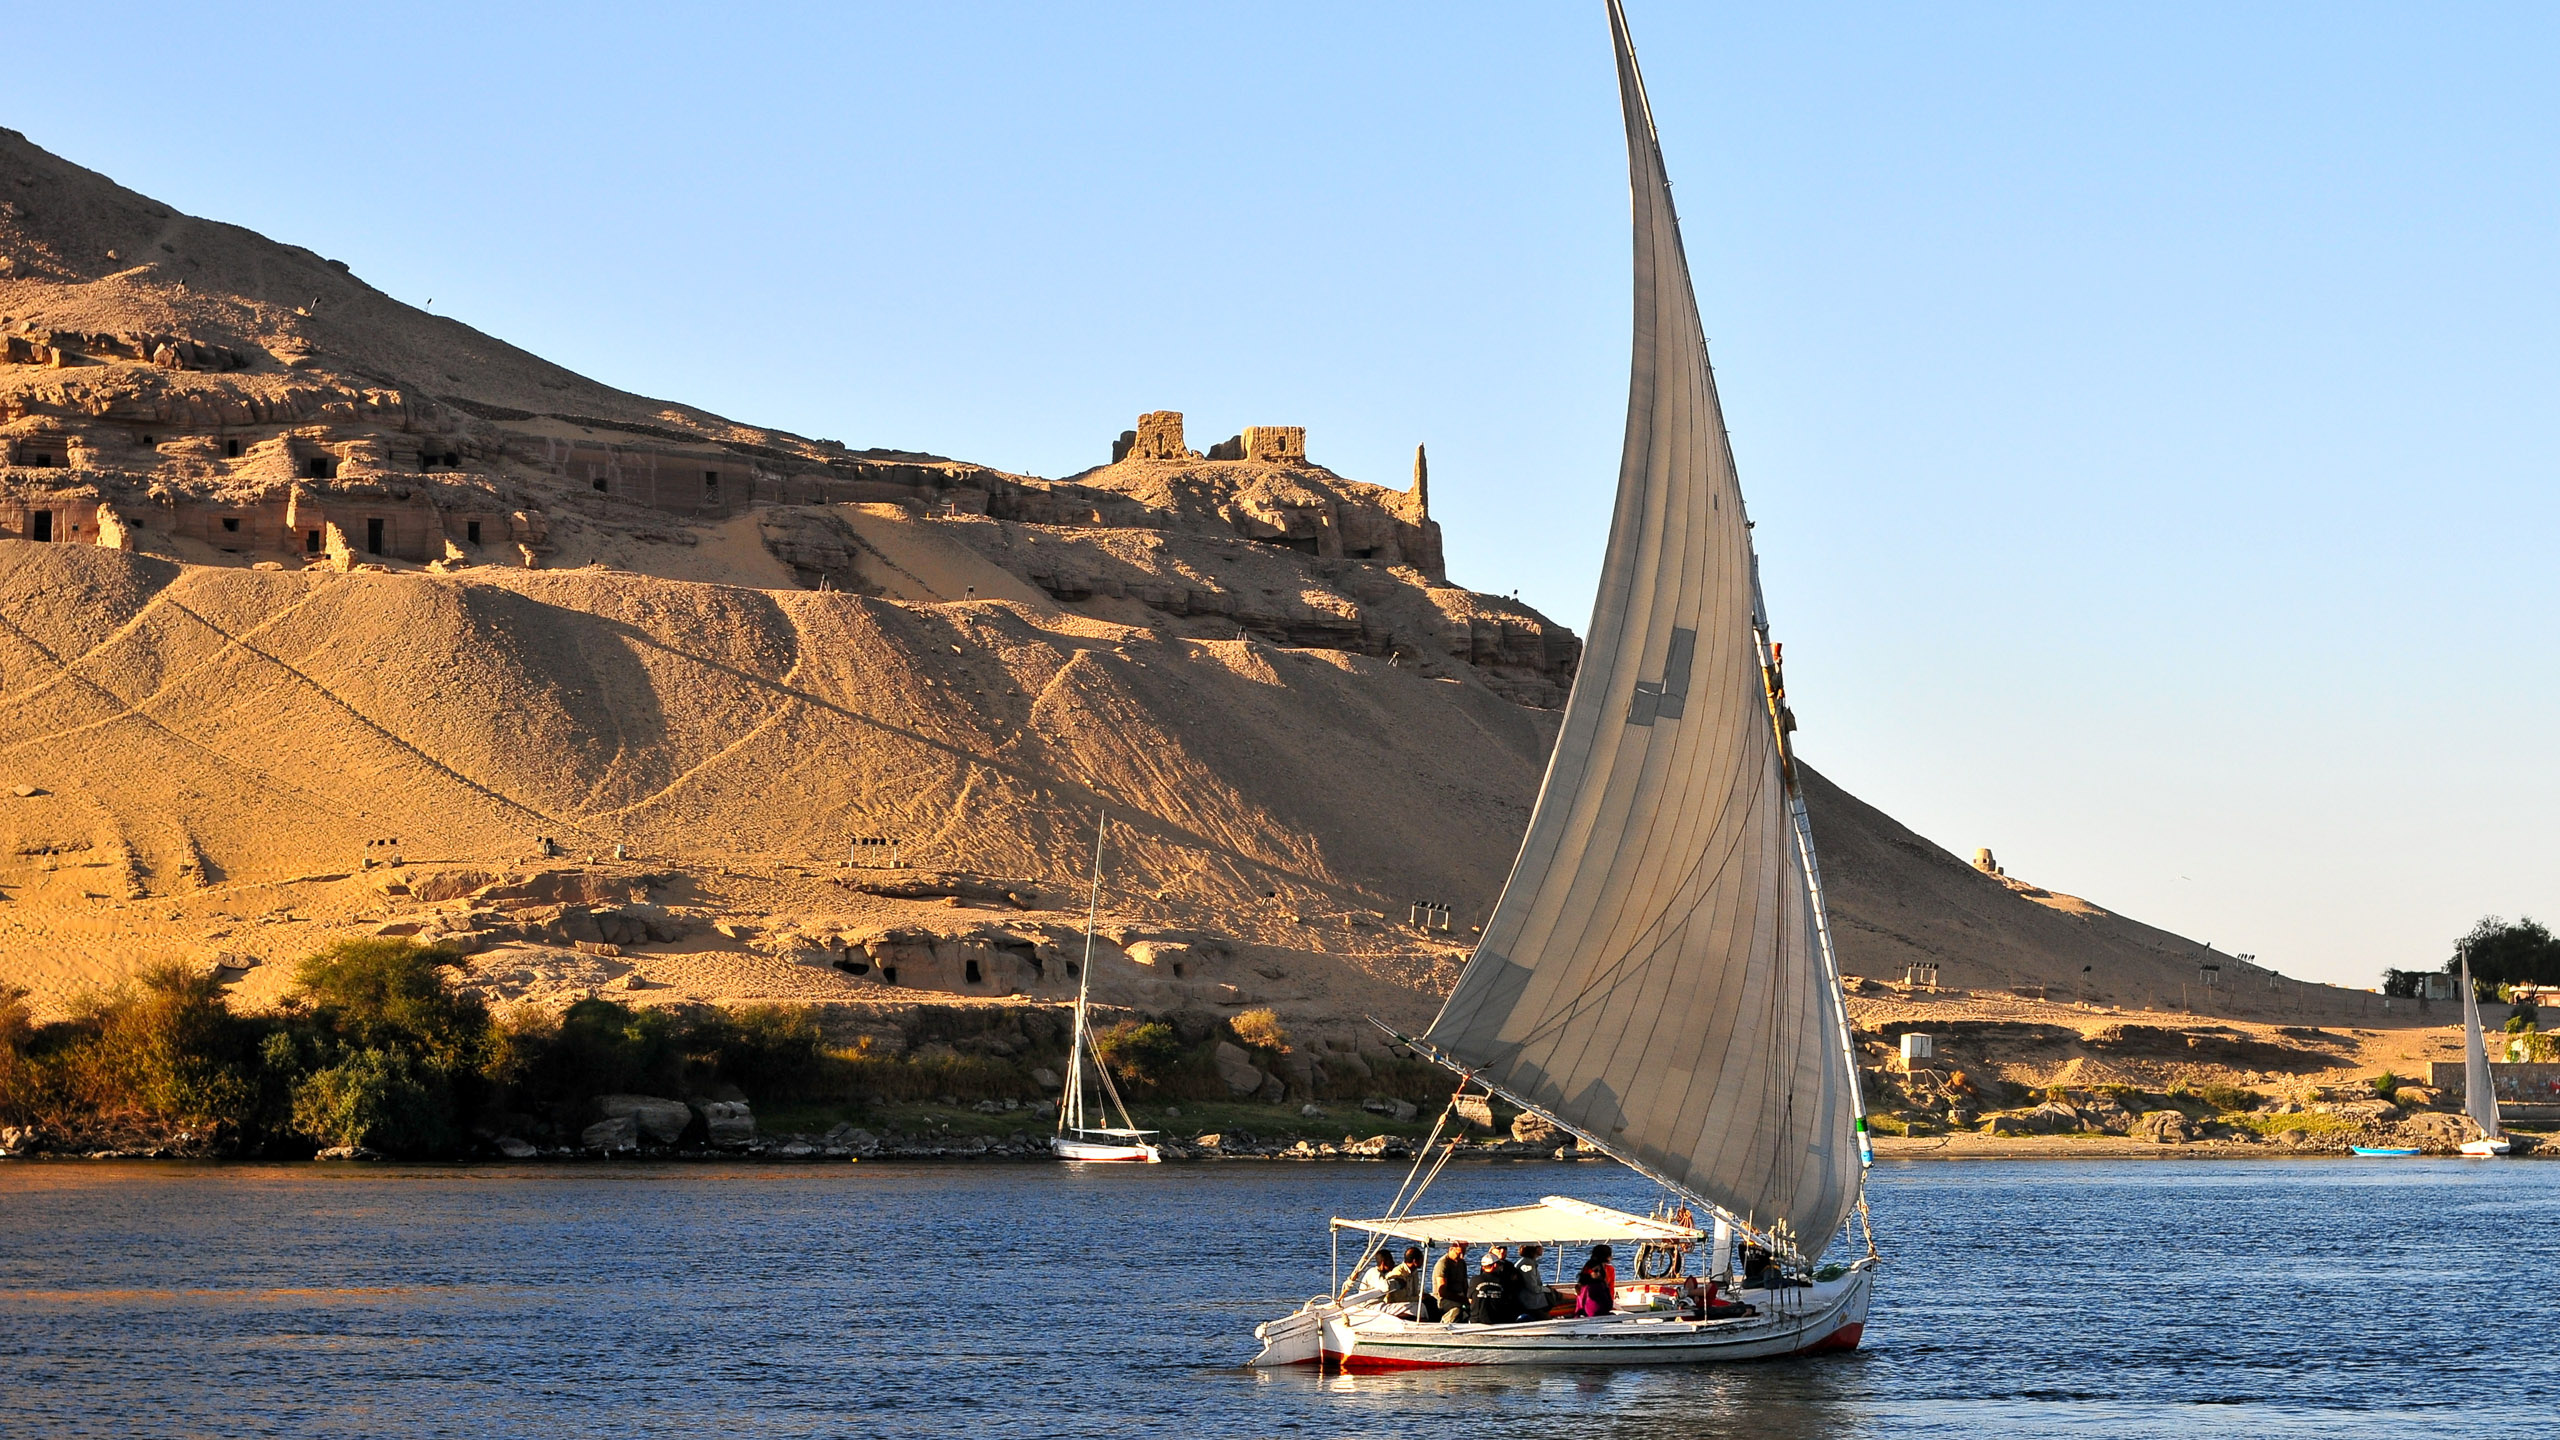 The Nile River, Classic Egyptian journey, Luxurious cruise, Ancient wonders, 2560x1440 HD Desktop